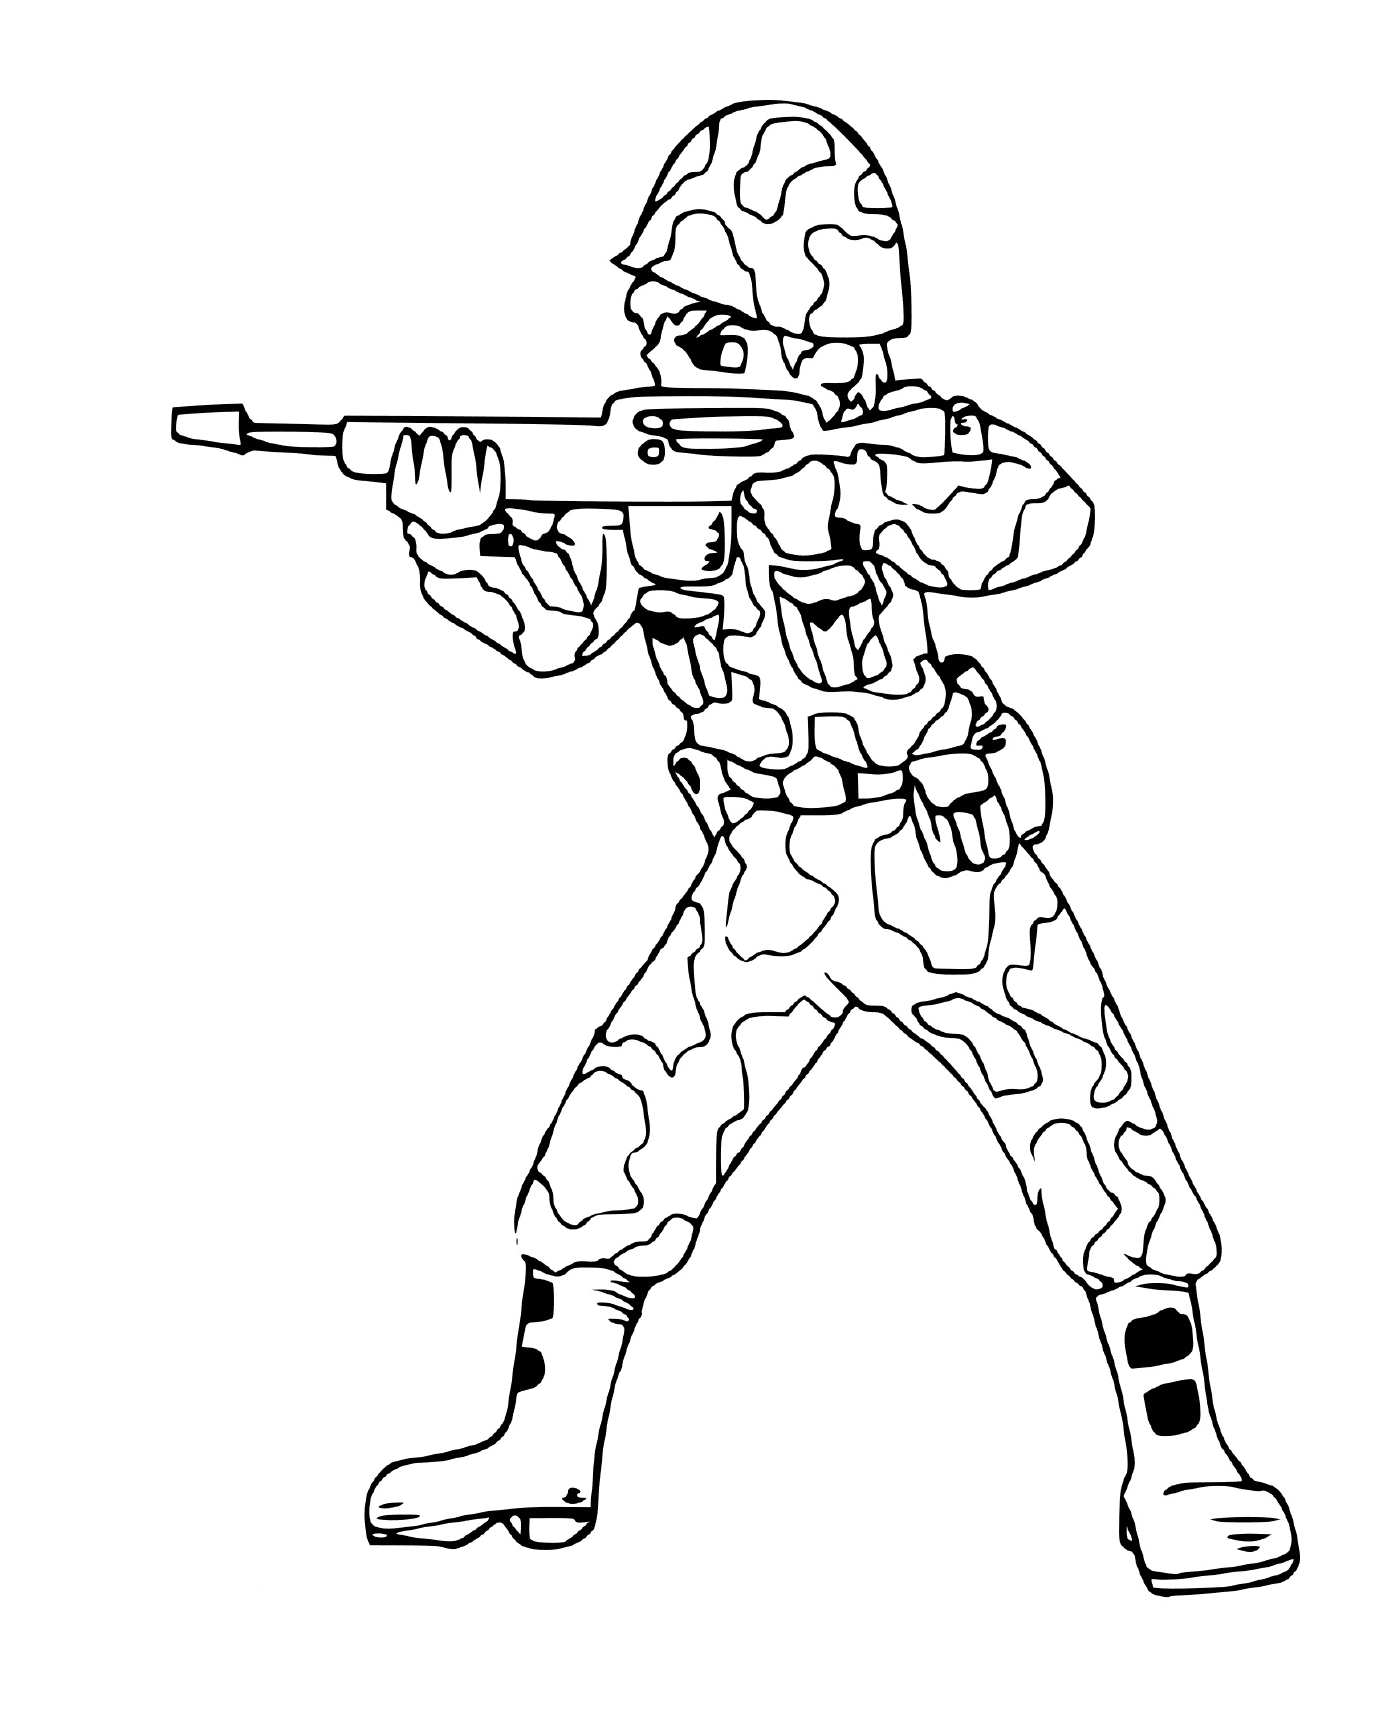  Soldier with rifle and camouflage suit 